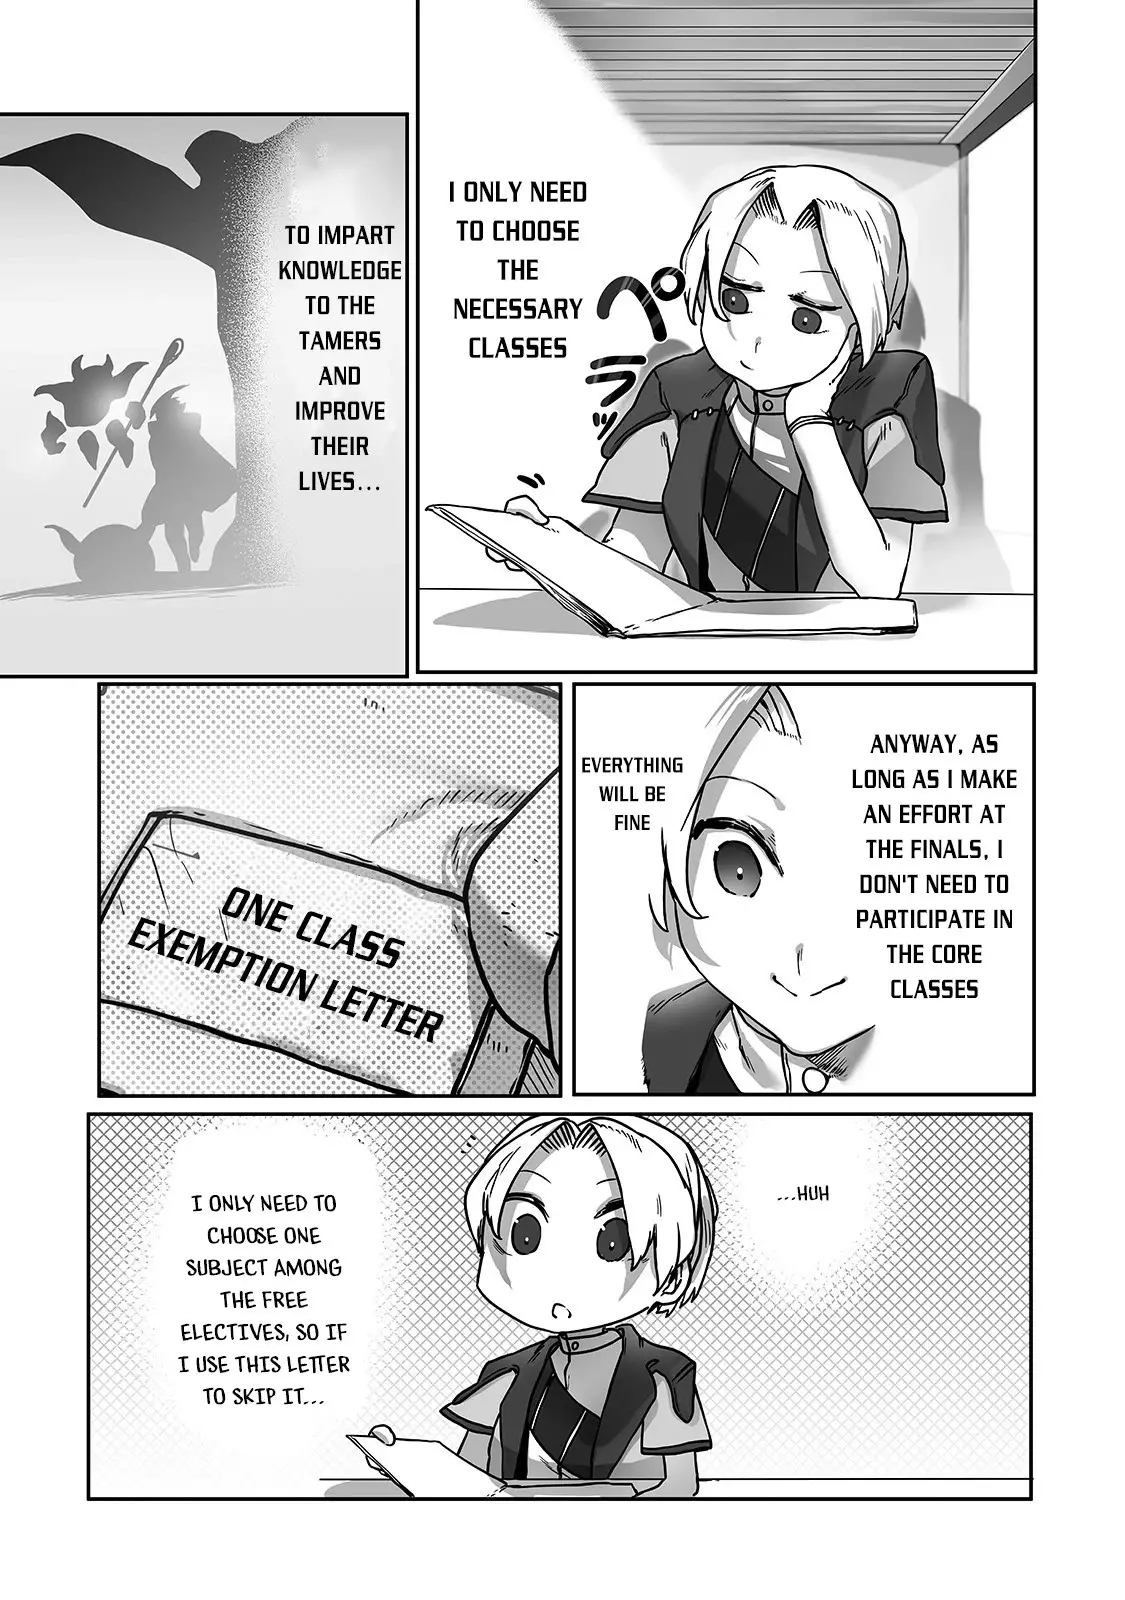 The Useless Tamer Will Turn Into The Top Unconsciously By My Previous Life Knowledge - 9 page 12